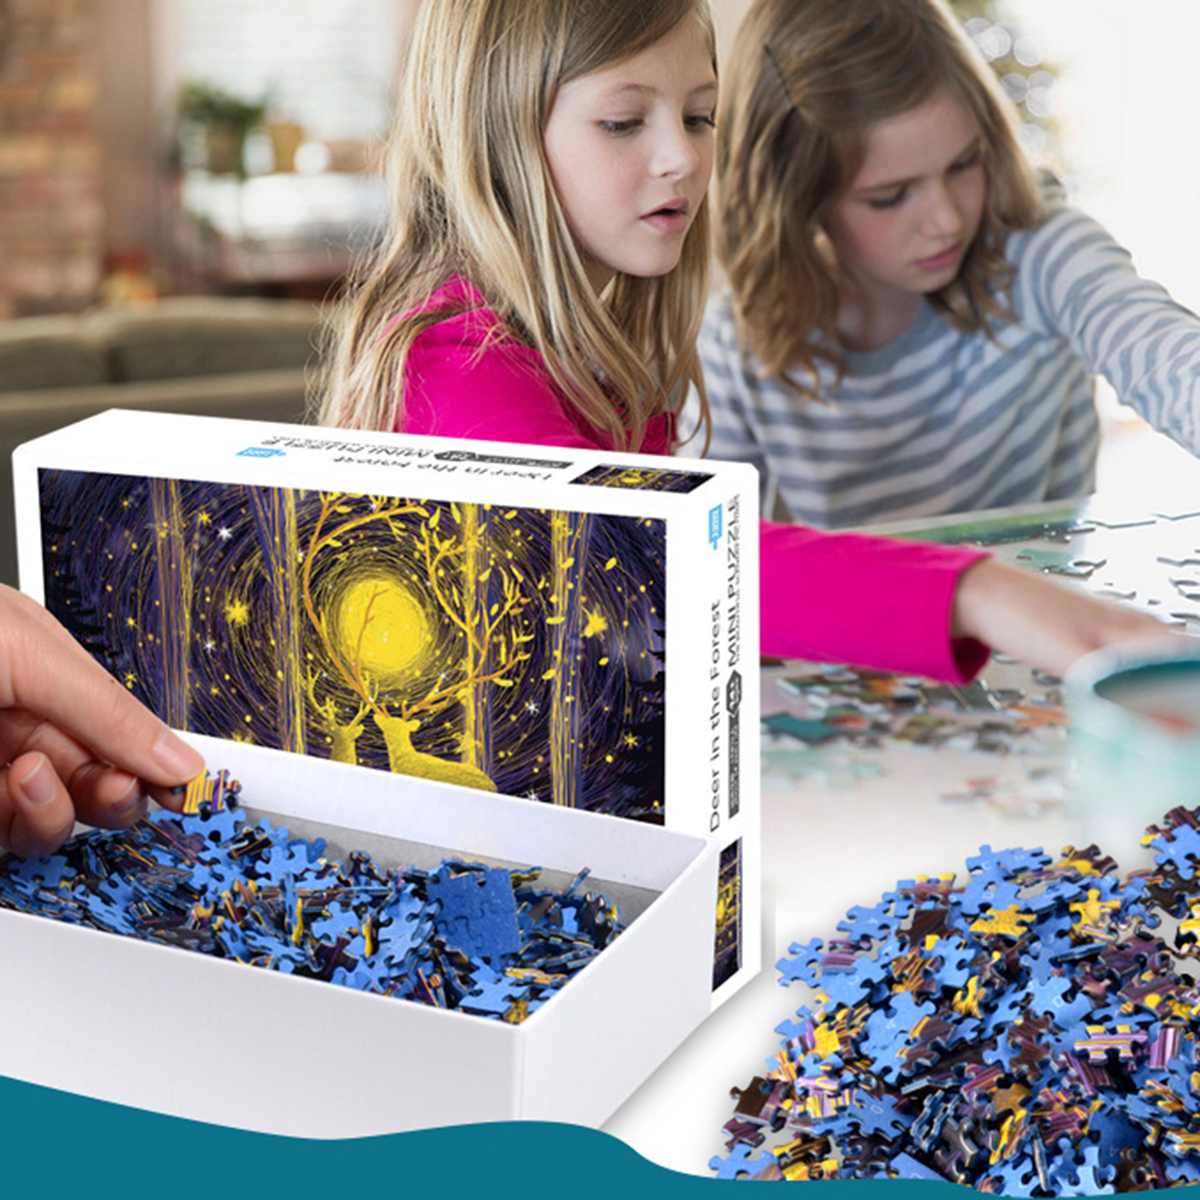 1000-Pieces-Nuit-Etoilee-DIY-Assembly-Jigsaw-Puzzles-Landscape-Picture-Educational-Games-Toy-for-Adu-1844620-2